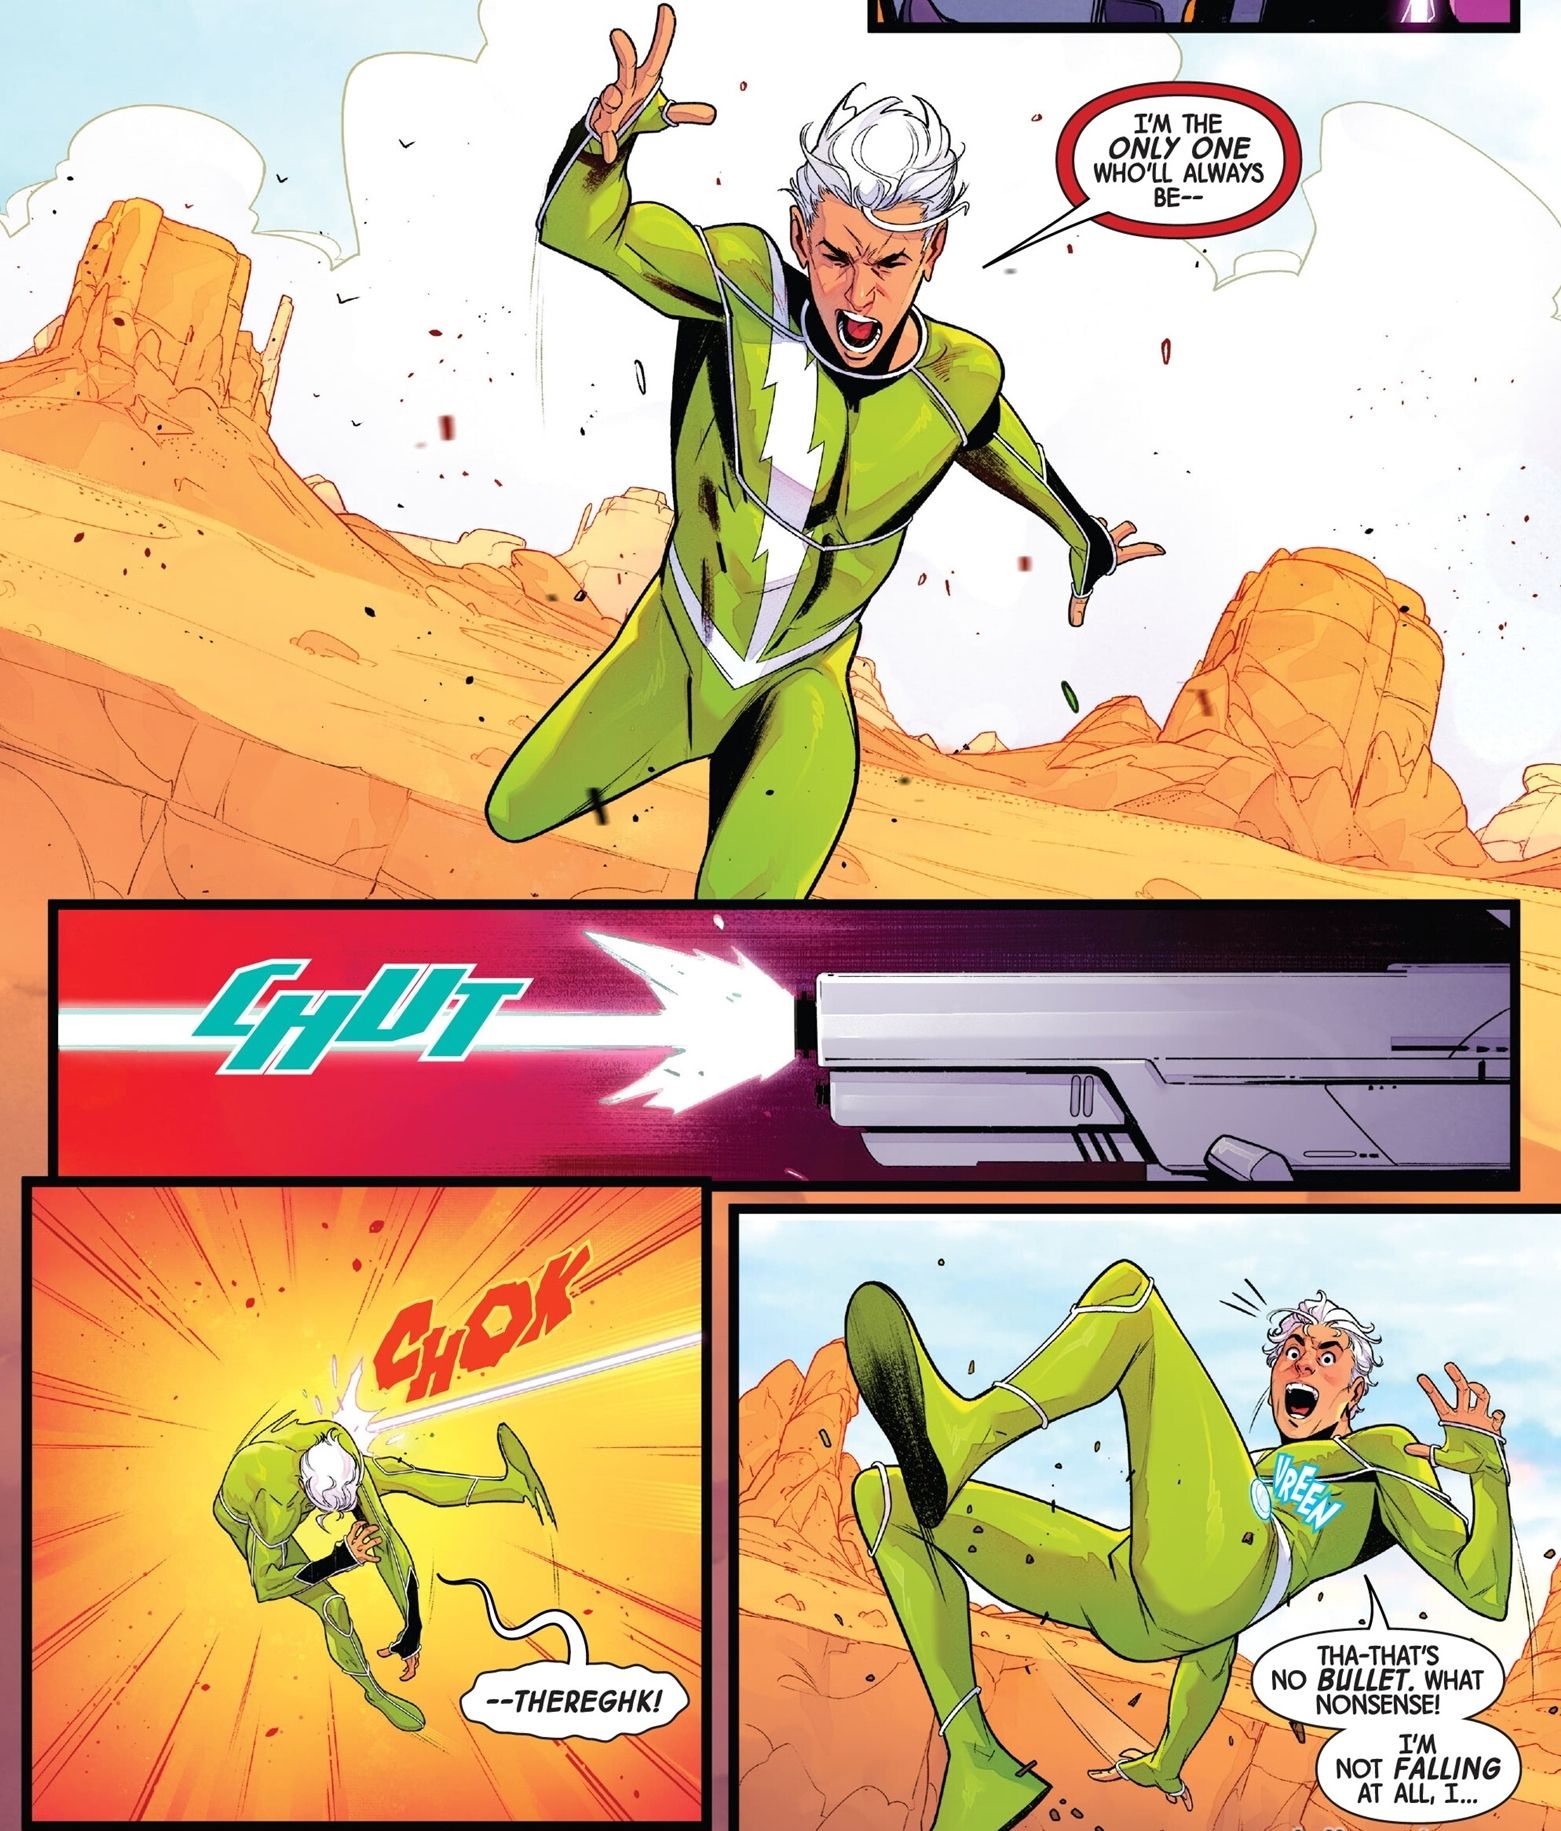 Quicksilver is hit with an Anti-Gravity Pellet. 